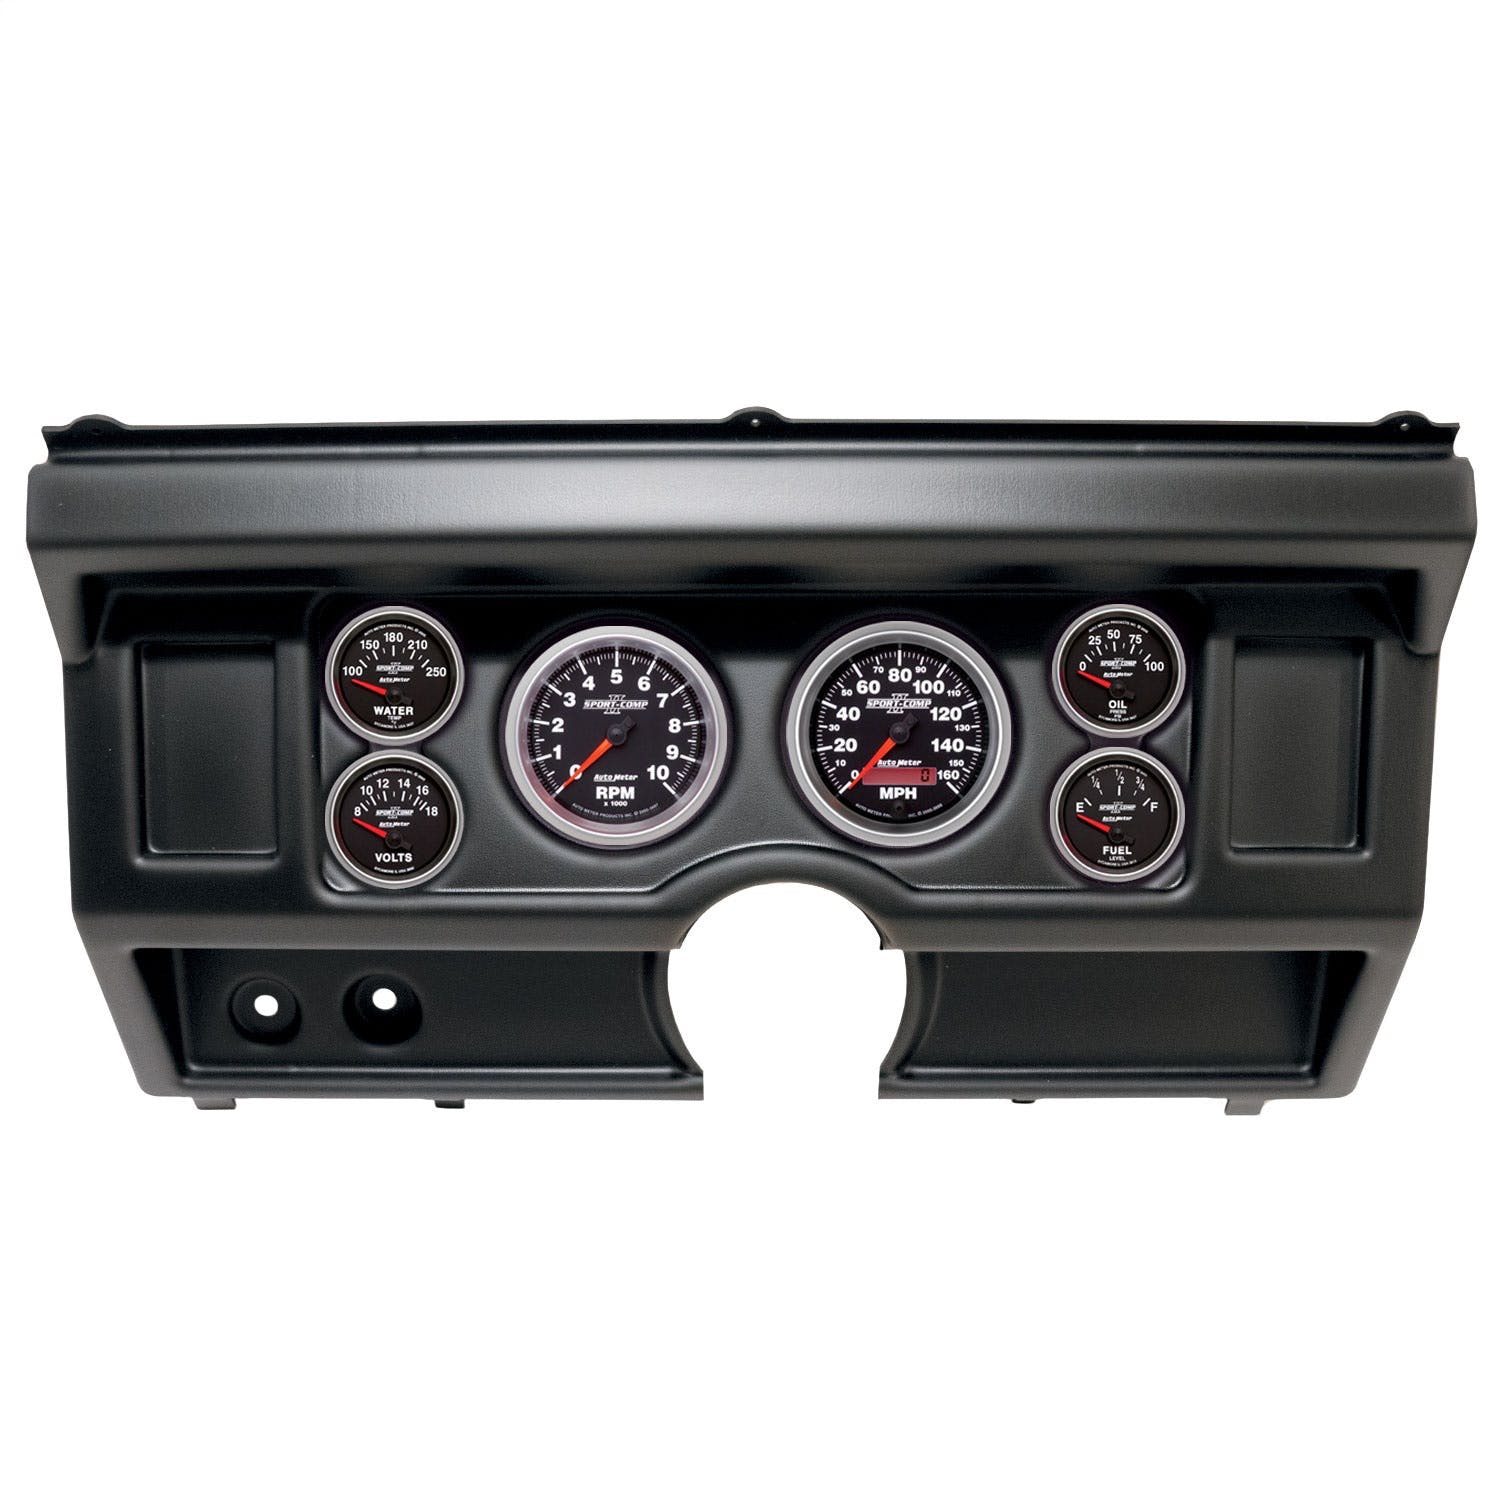 AutoMeter Products 2918-12 6 Gauge Direct-Fit Dash Kit, Ford Truck No Ac 80-86, Sport-Comp II